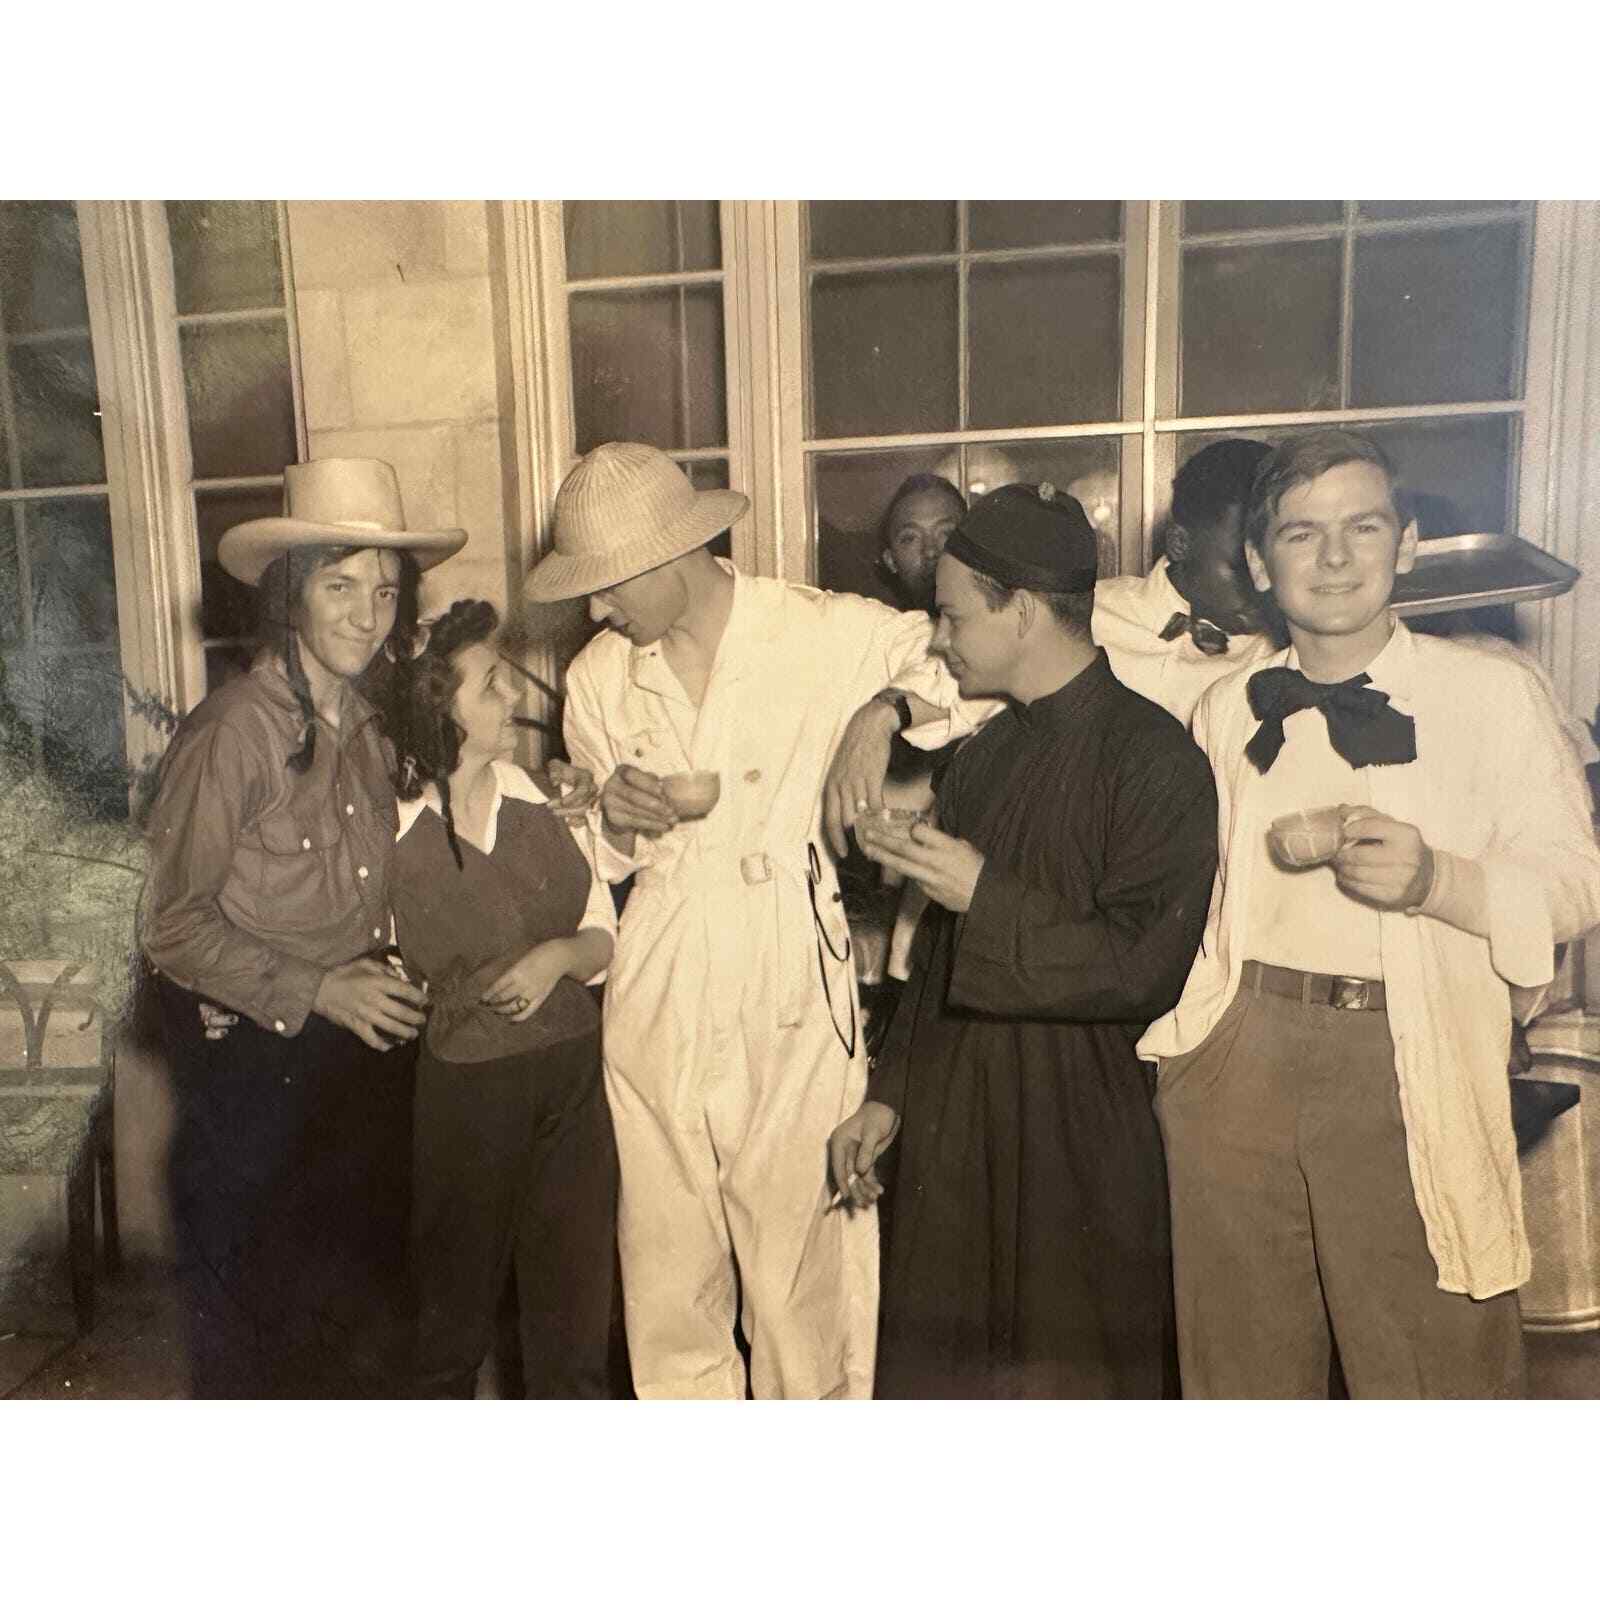 VINTAGE PHOTO Halloween costume party 1940 Texas wealthy African American server